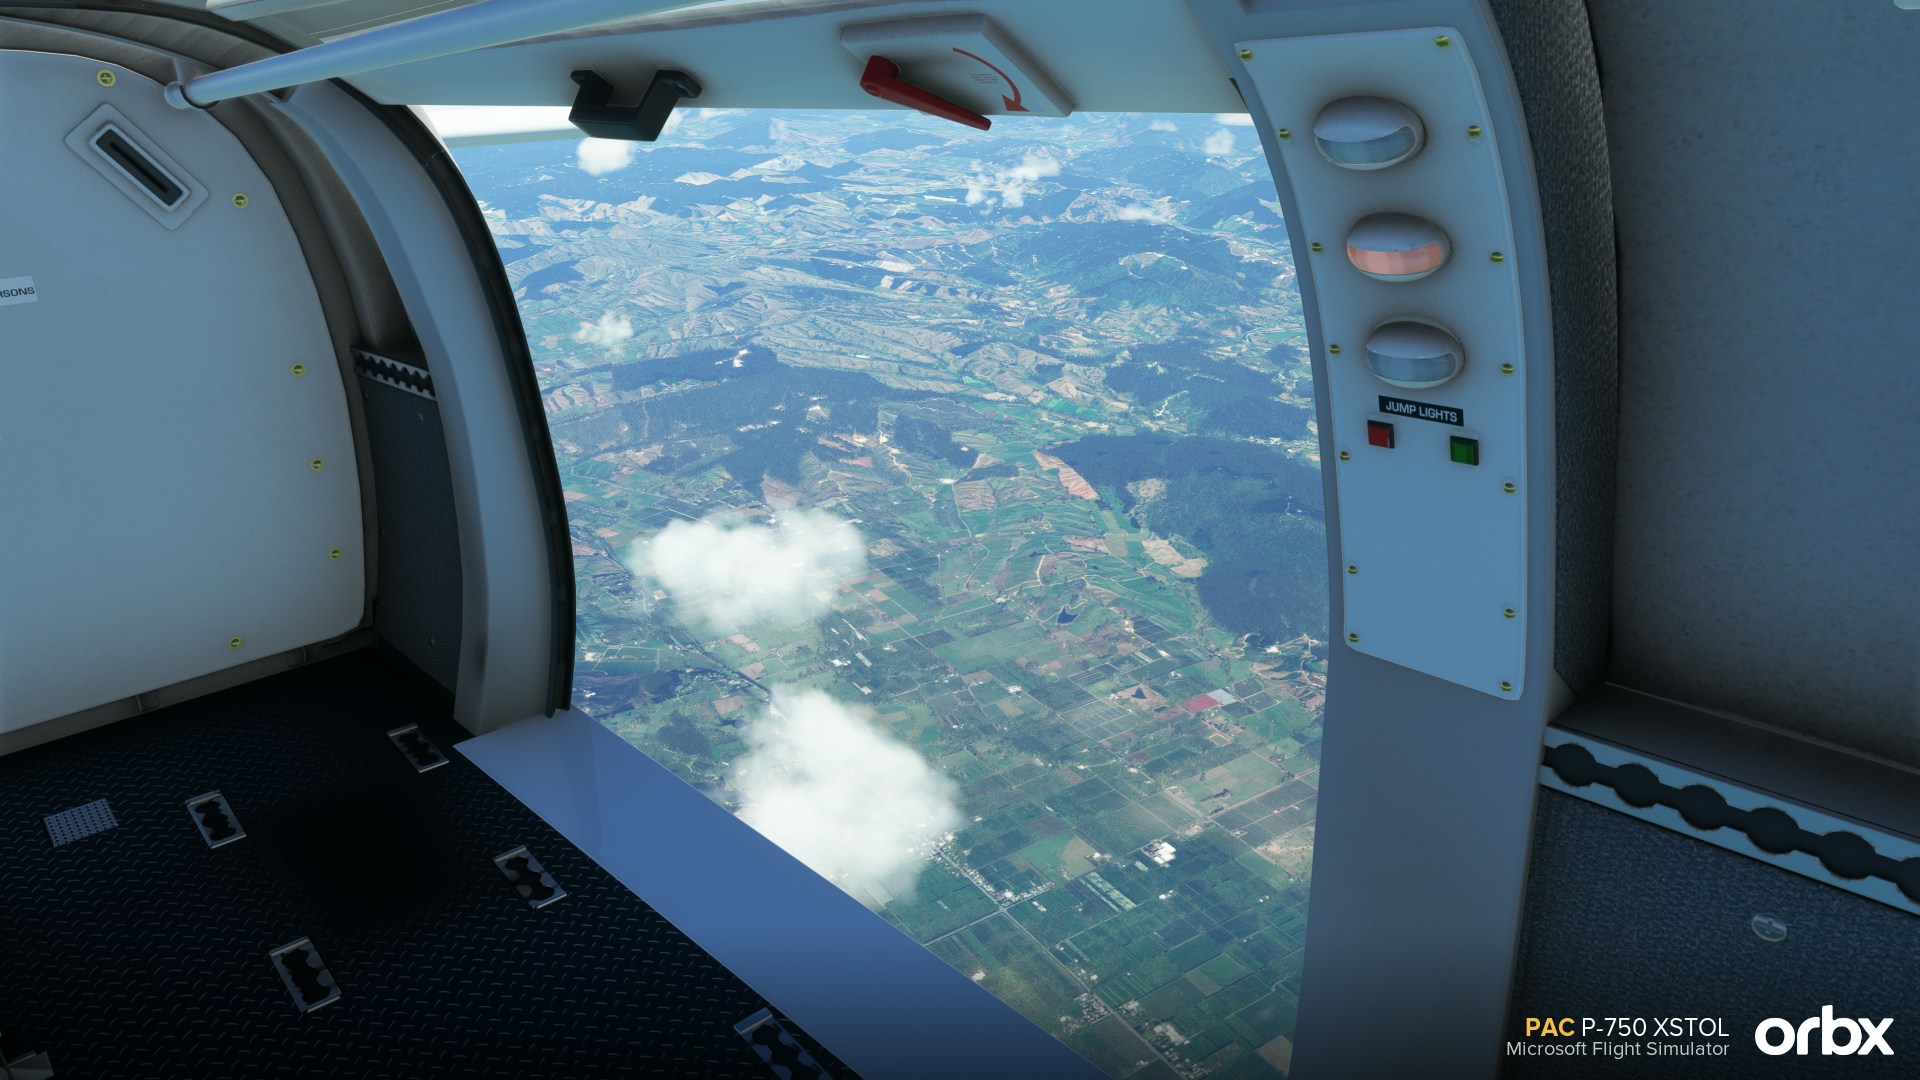 Orbx Releases PAC P-750 XSTOL for MSFS